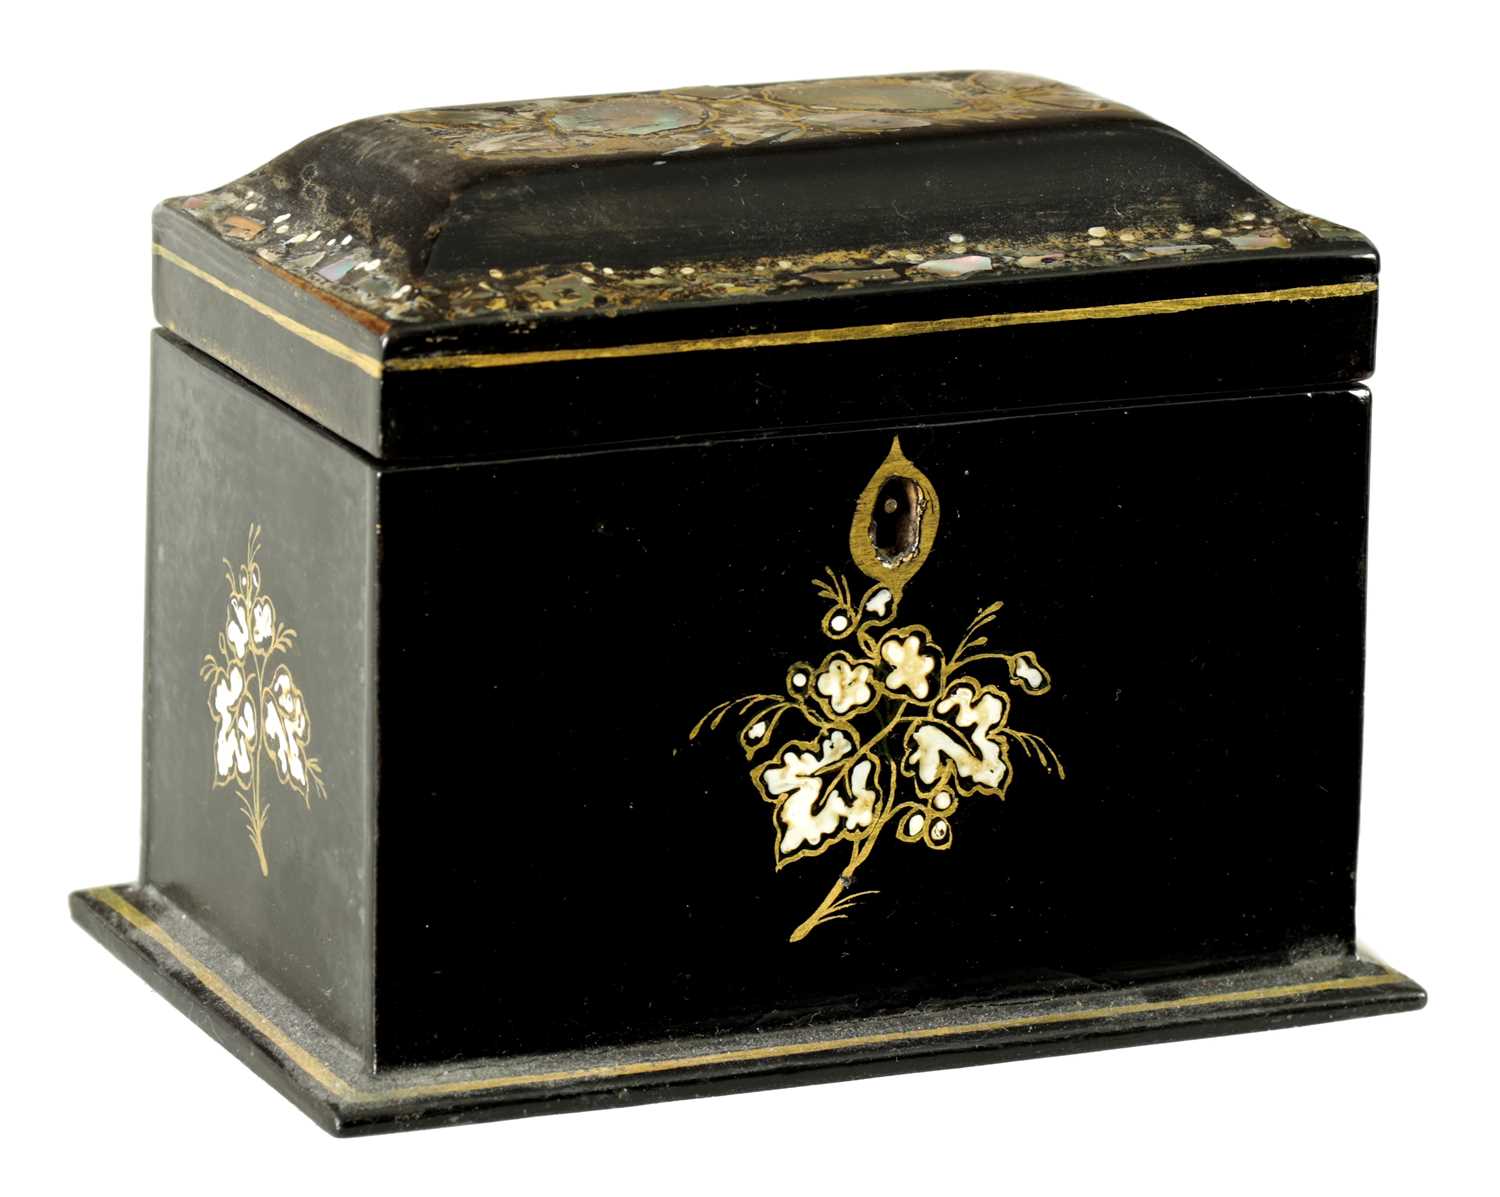 A 19TH CENTURY MOTHER OF PEARL INLAID LACQUERED TEA CADDY